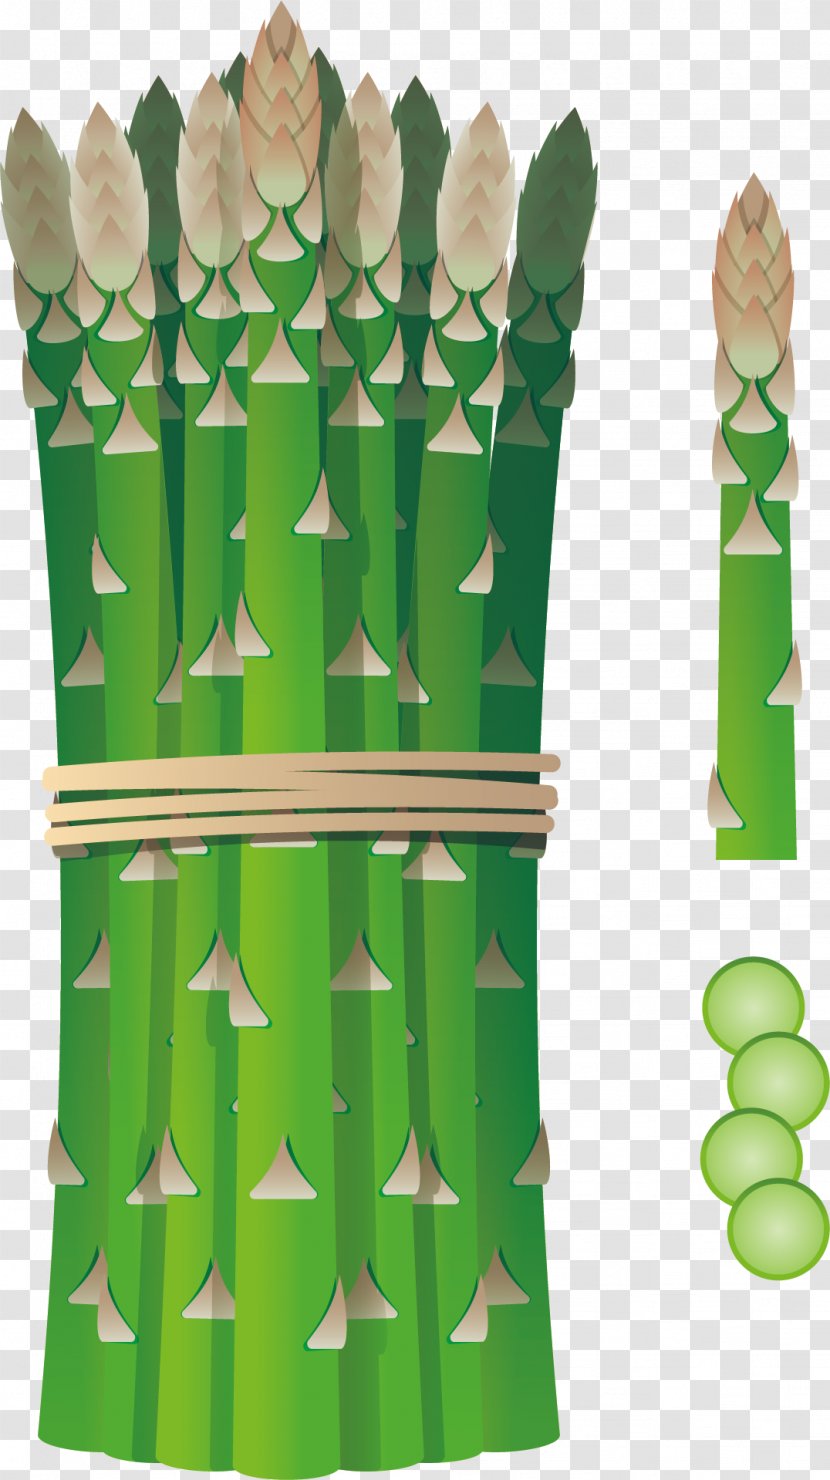 Vegetable Dish Bamboo Shoot - Tree - Special Shoots Transparent PNG